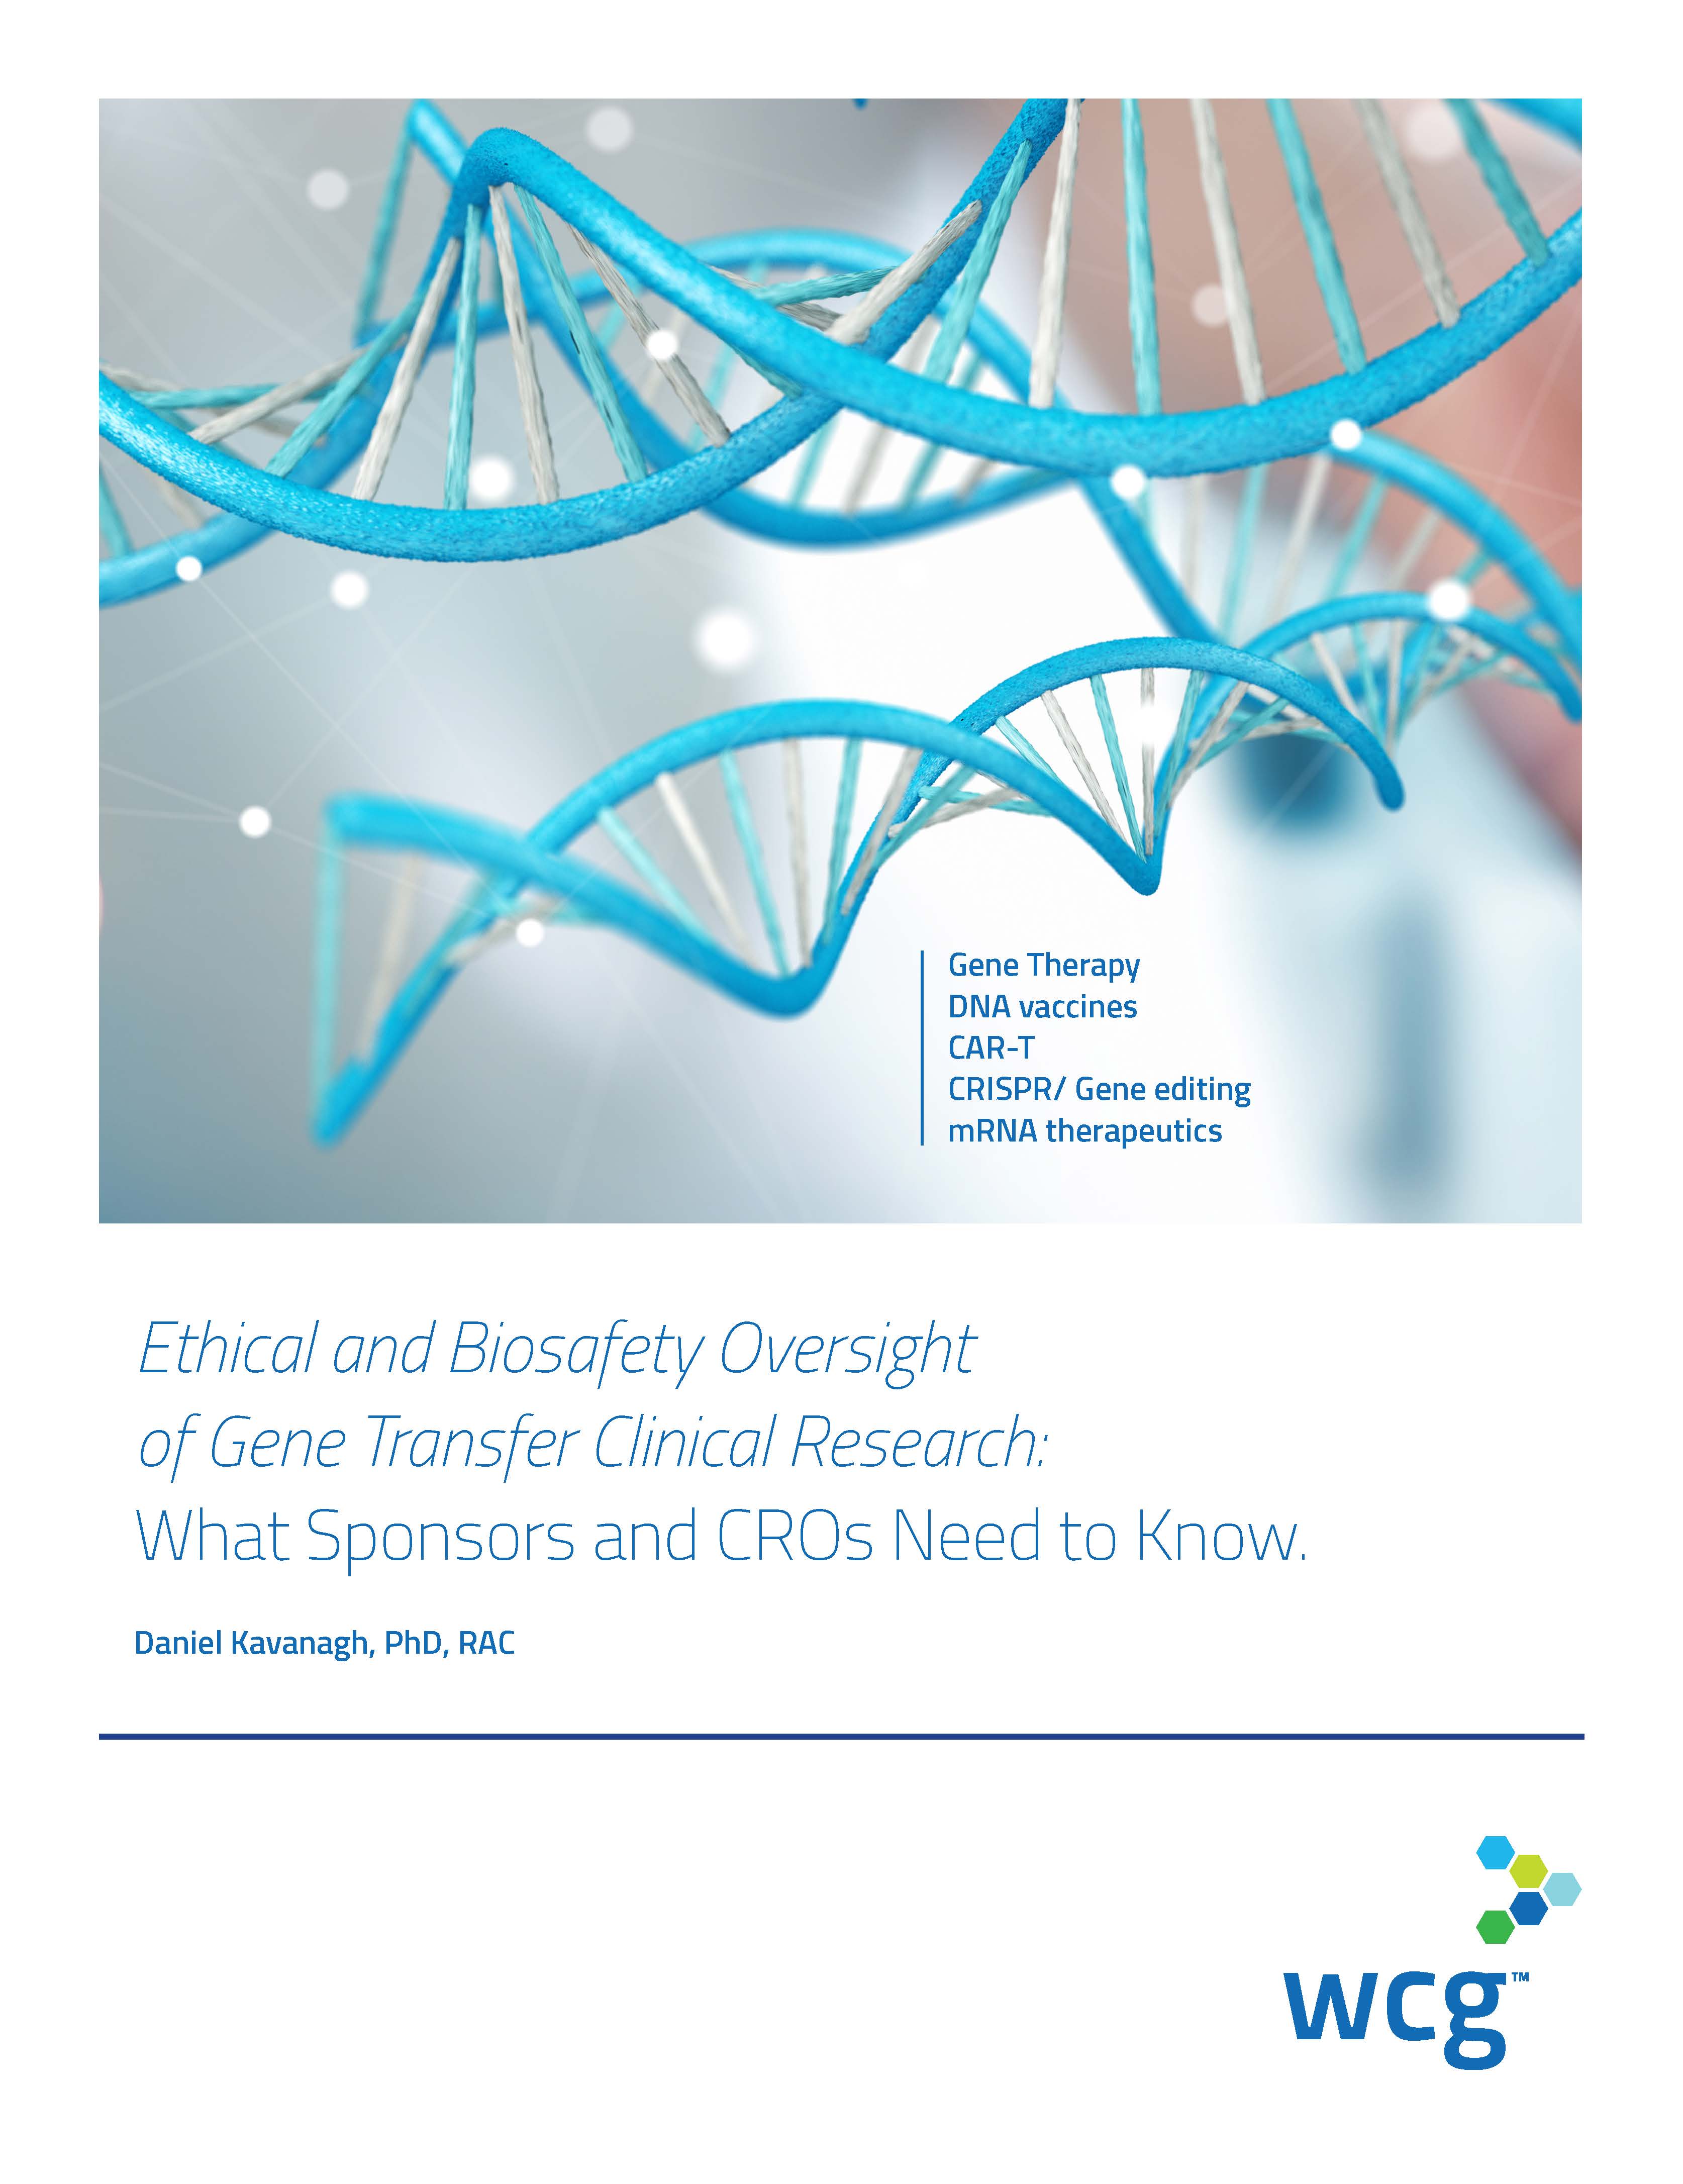 Ethical Biosafety Oversight of Gene Transfer Research
